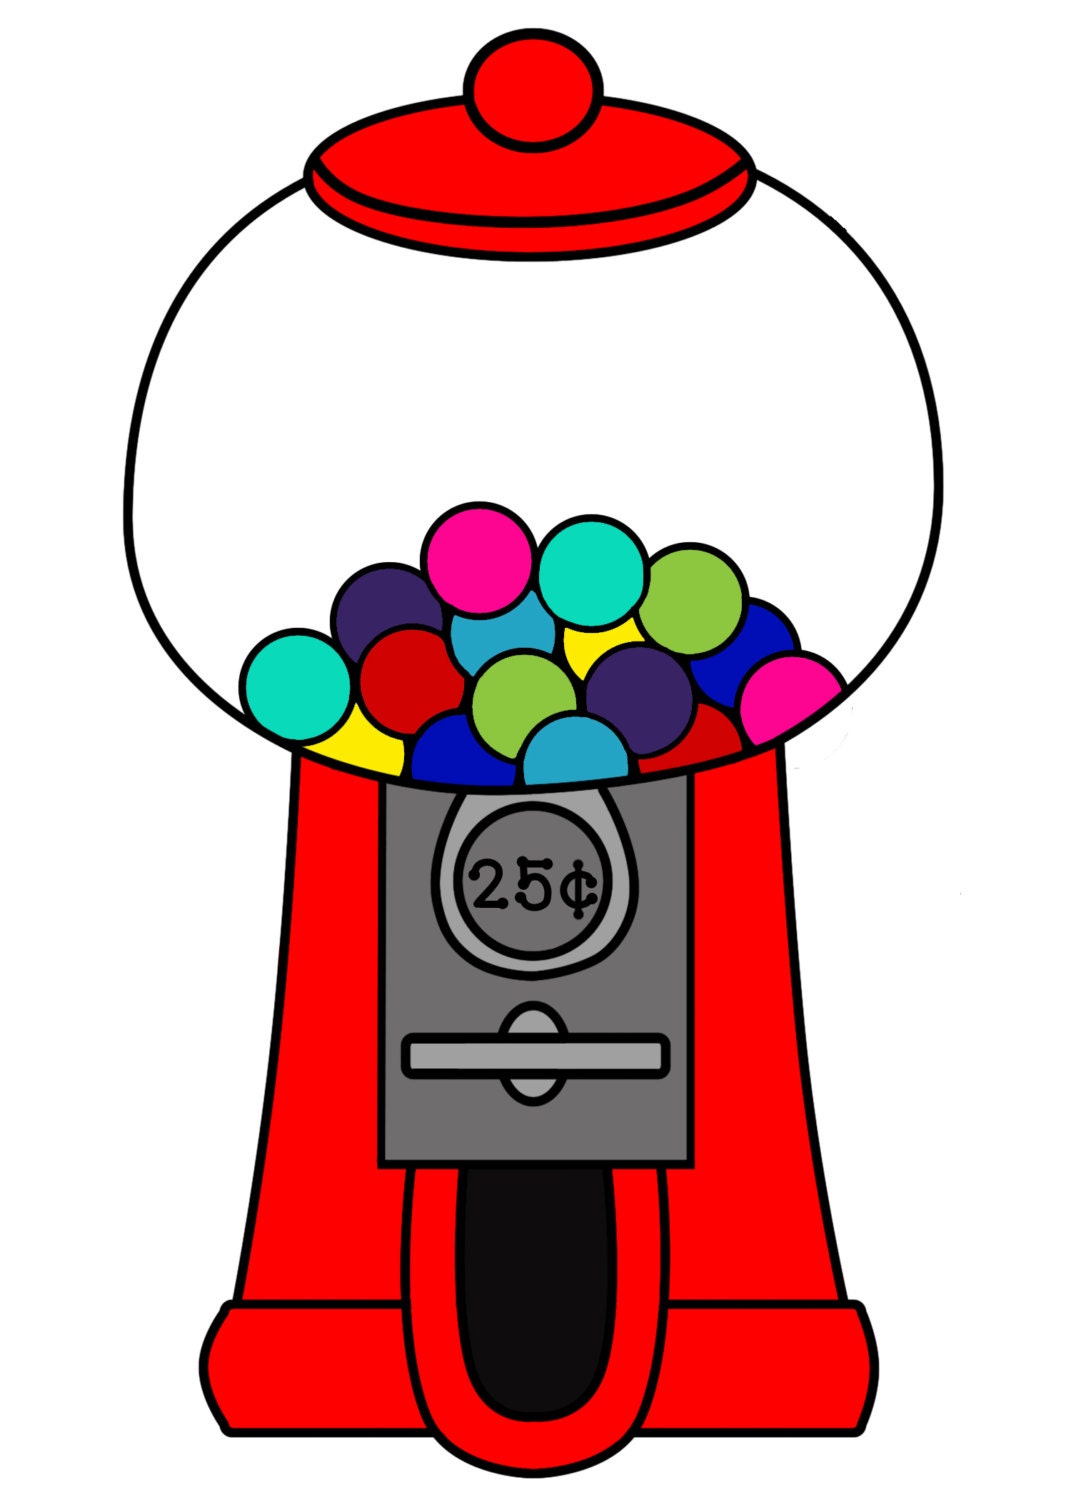 Gumball Machine and Gumball Clipart 18 Images Jpegs/pngs - Etsy Canada